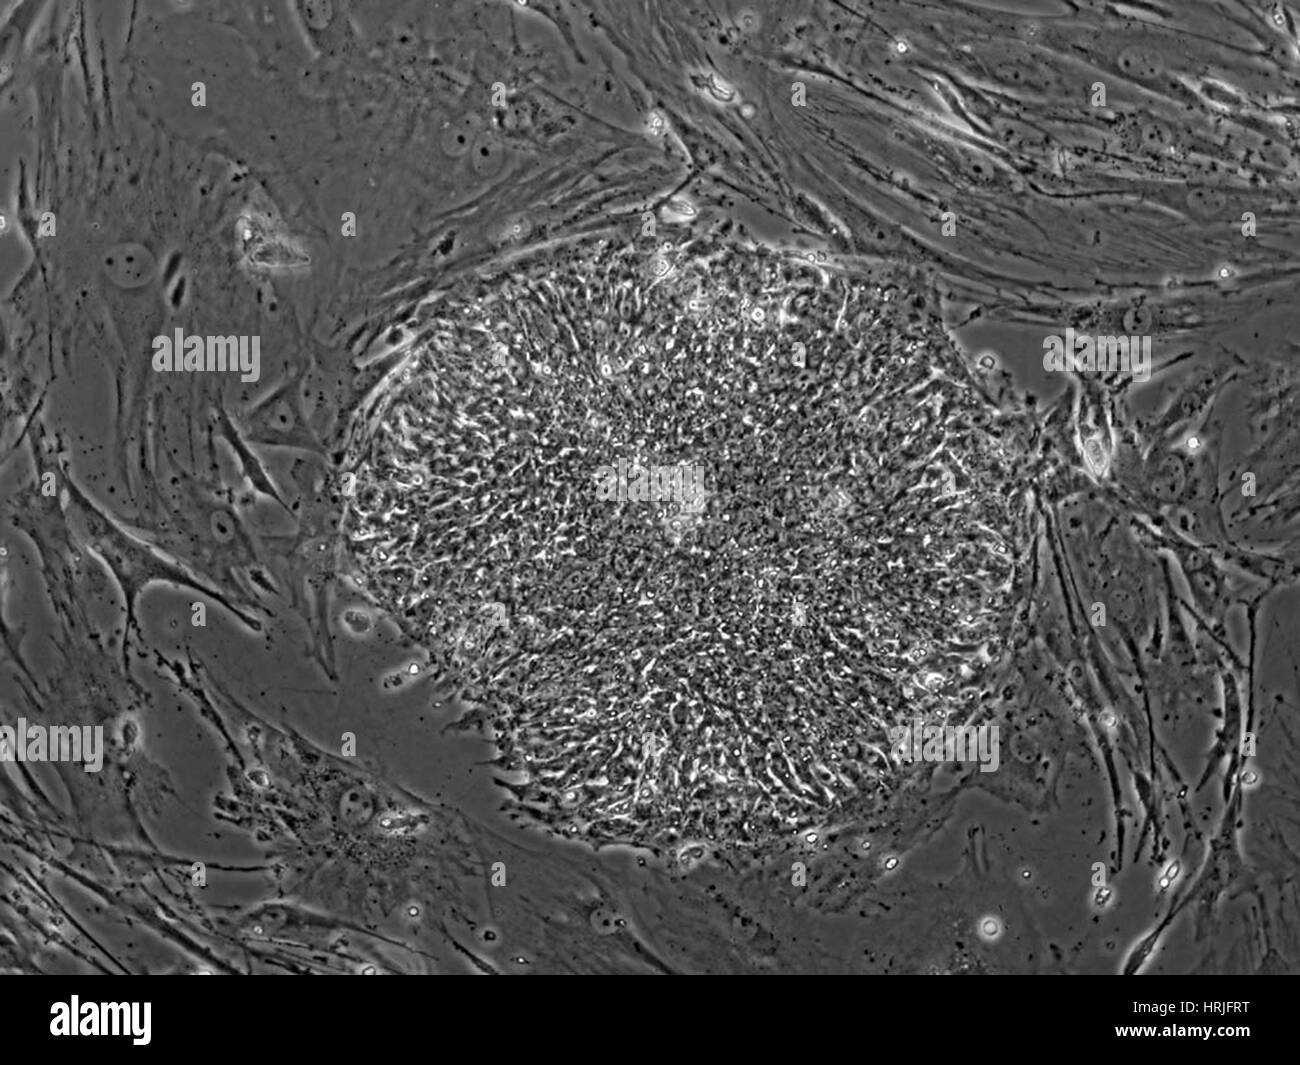 Human Embryonic Stem Cell Line TE03 Stock Photo